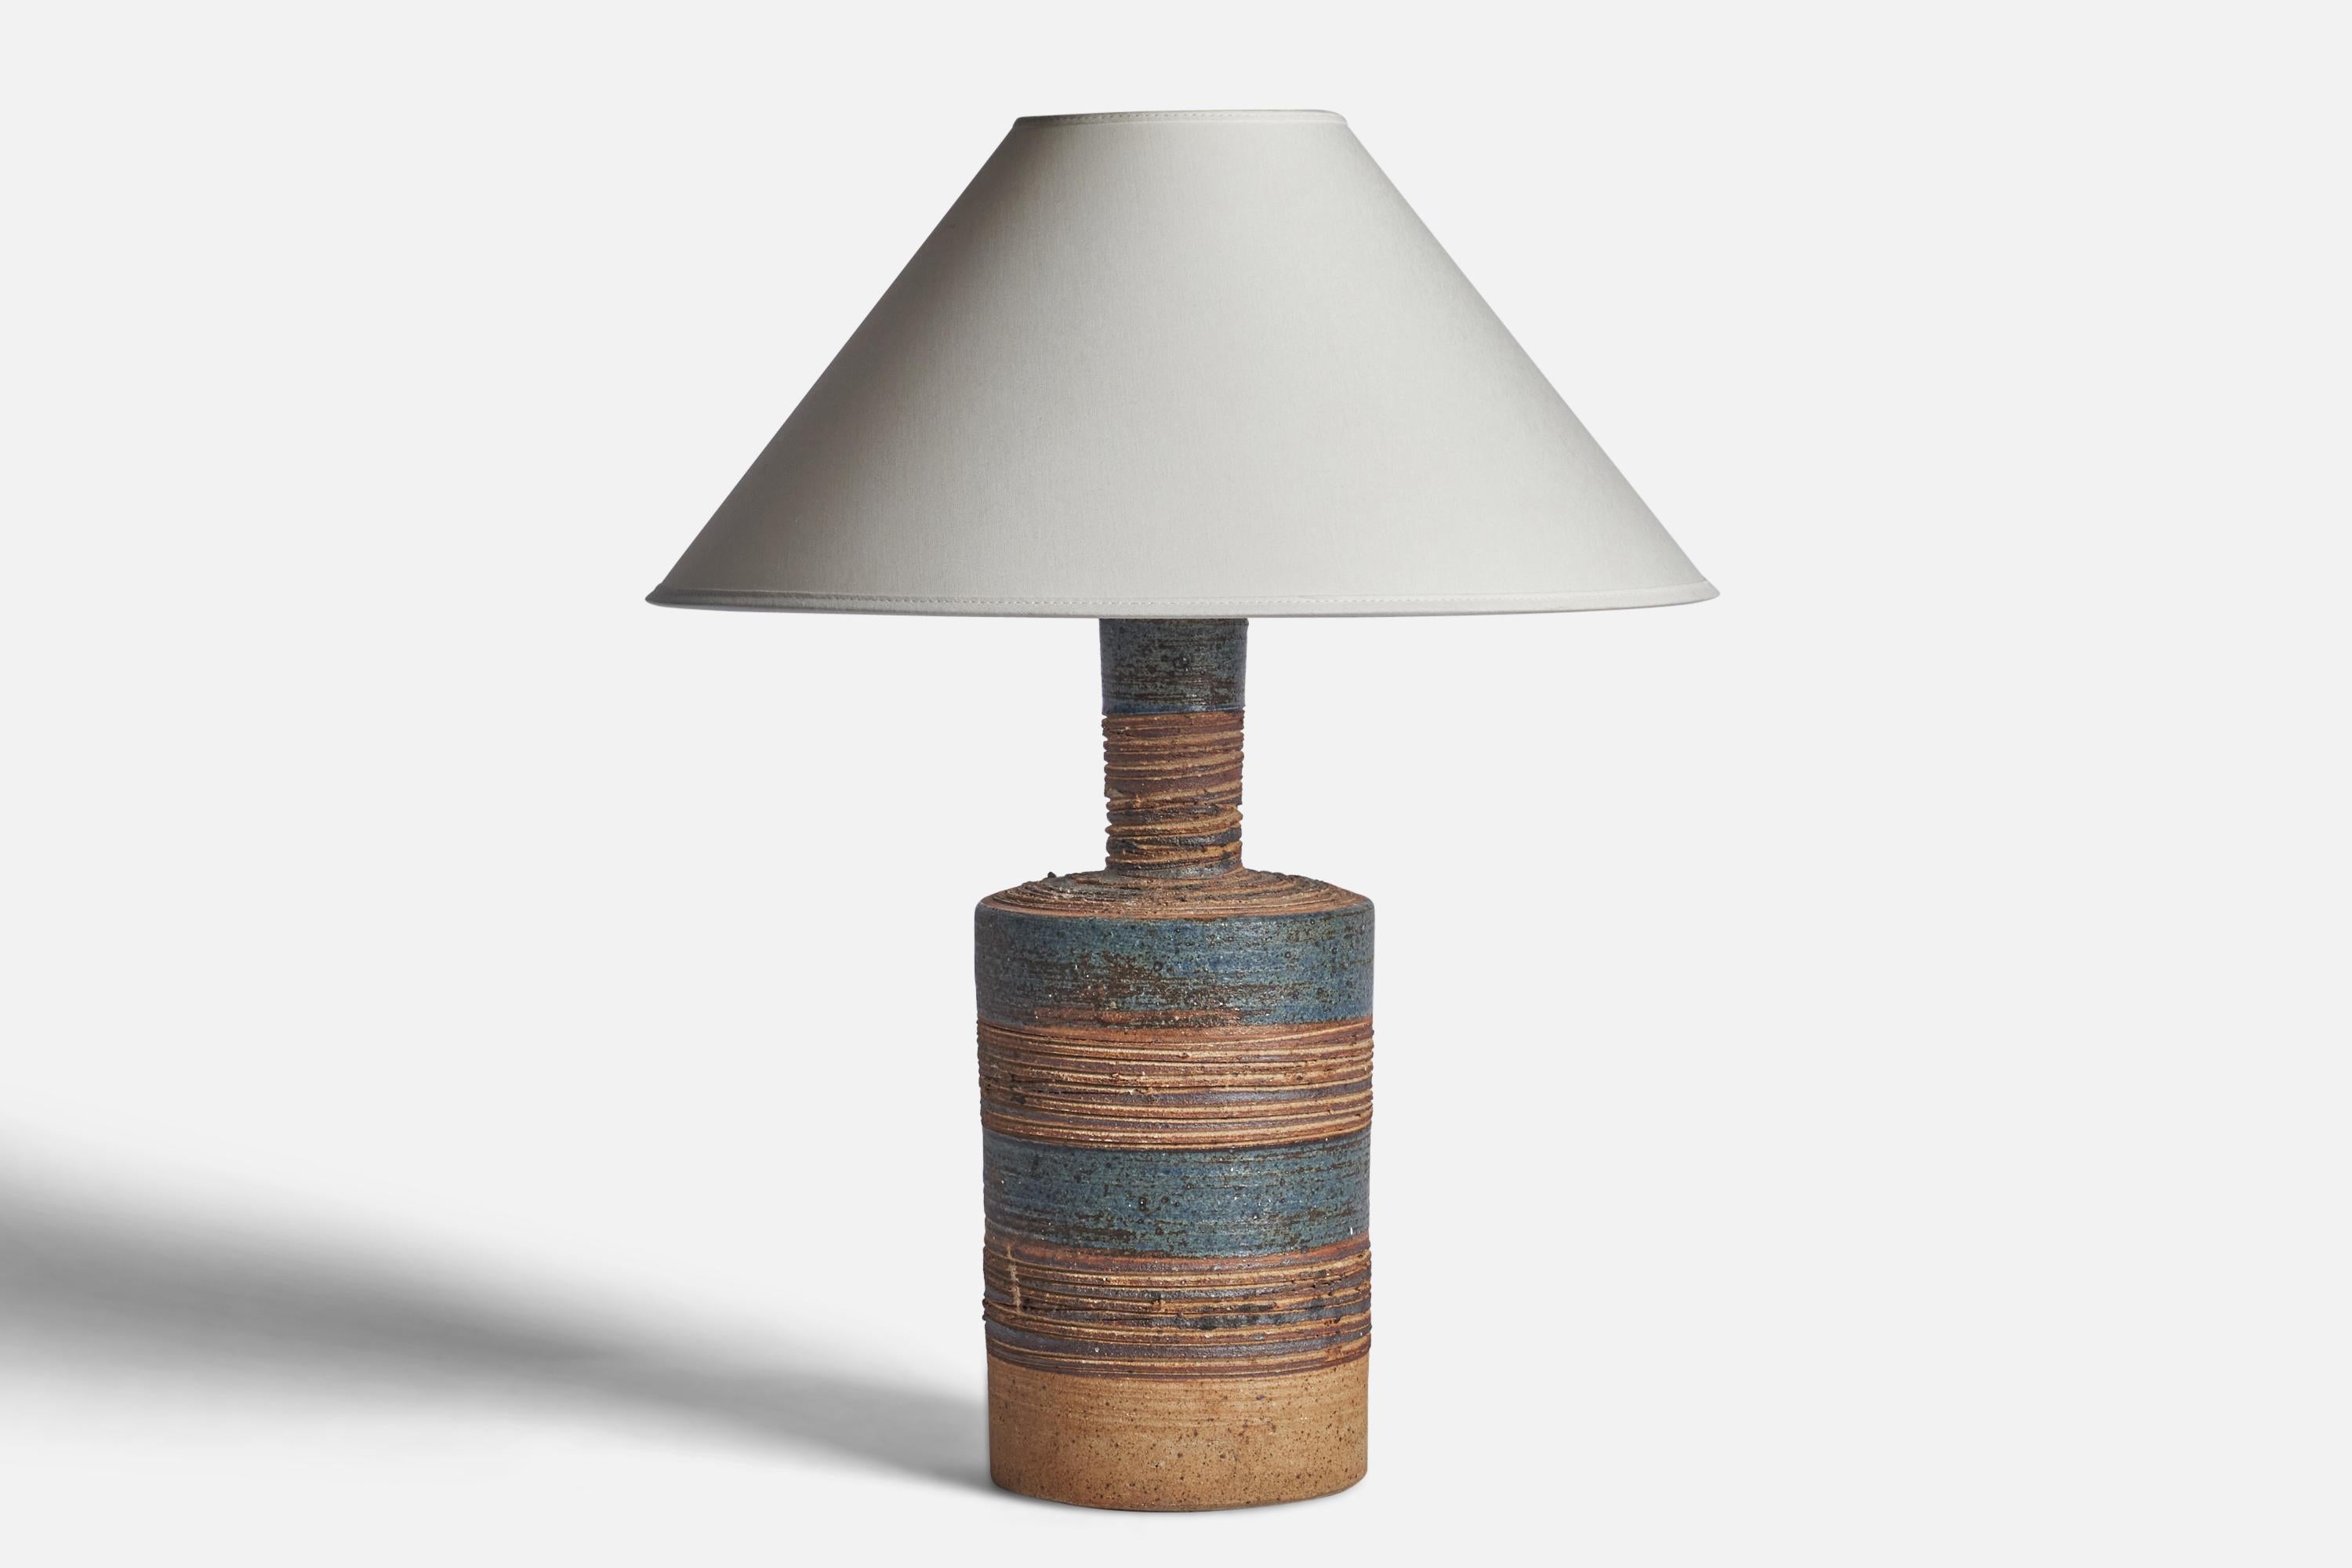 A blue and brown-glazed stoneware table lamp designed and produced by Tue Poulsen, Denmark, 1960s.

Dimensions of Lamp (inches): 16.15 H x 5.70” Diameter
Dimensions of Shade (inches): 4.5” Top Diameter x 16” Bottom Diameter x 7.25” H
Dimensions of